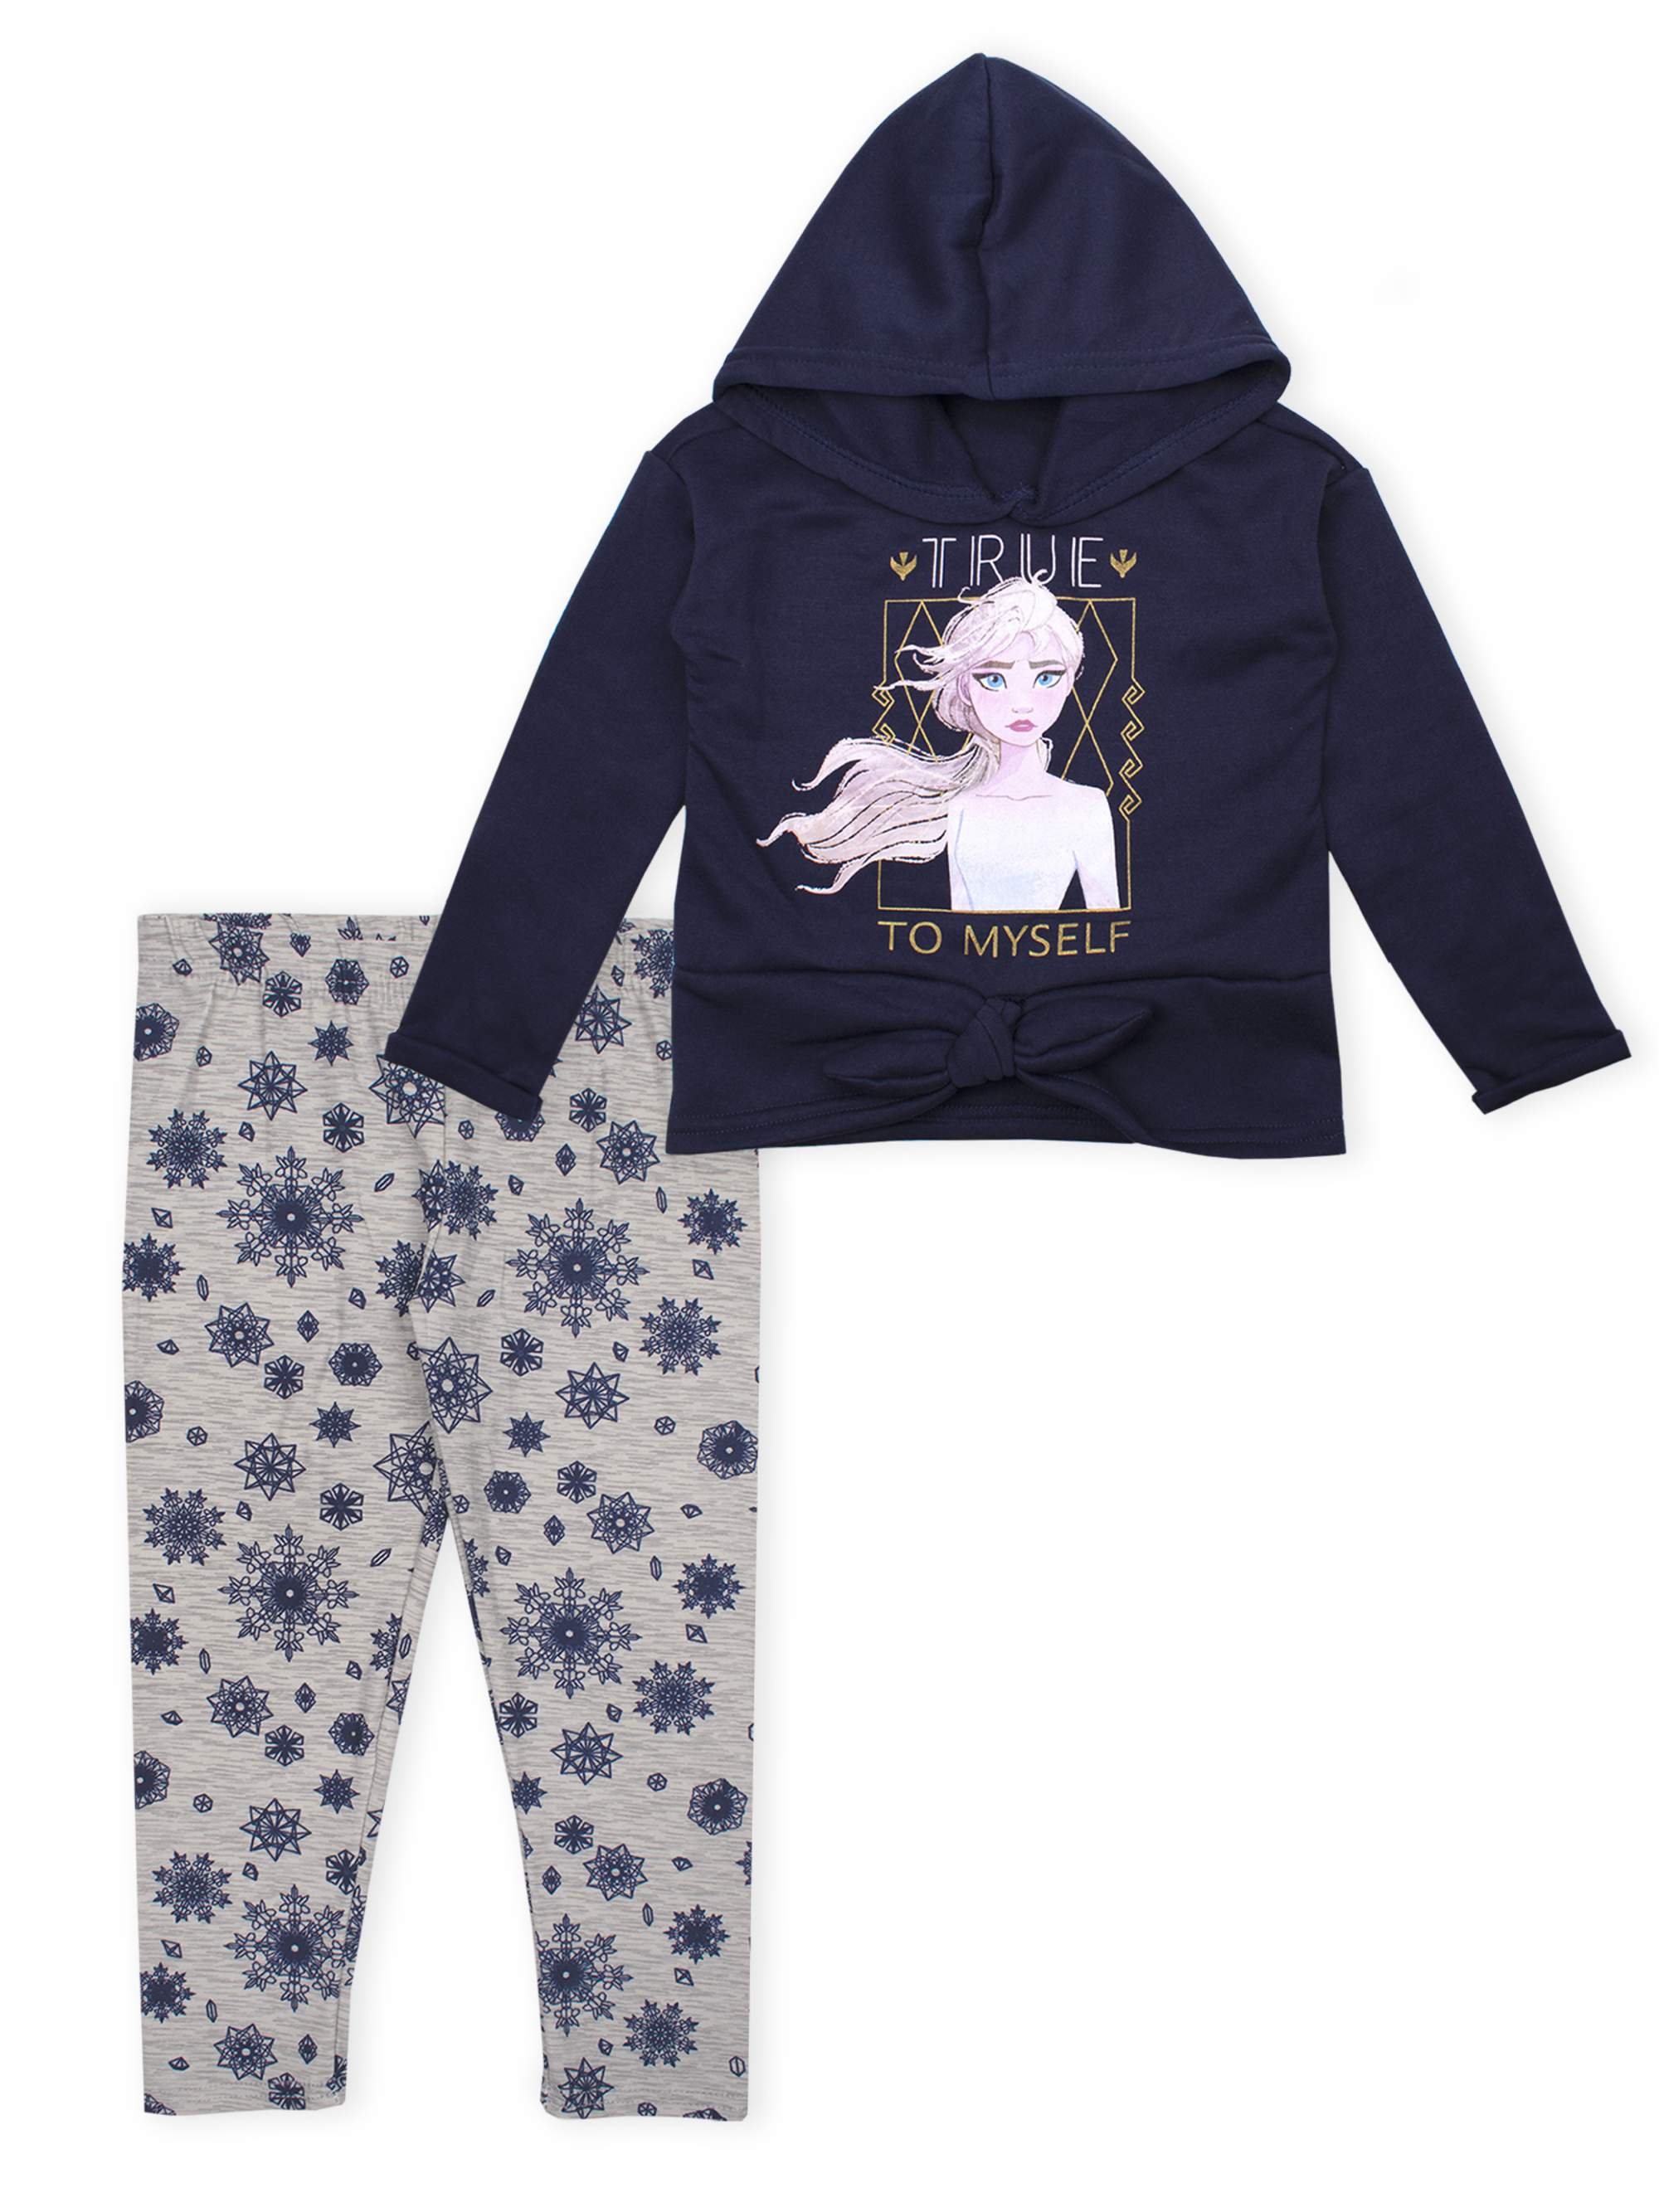 Disney Frozen 2 Anna & Elsa Toddler Girl Tie-Front Hoodie & Printed Leggings, 2pc Outfit Set - image 1 of 3